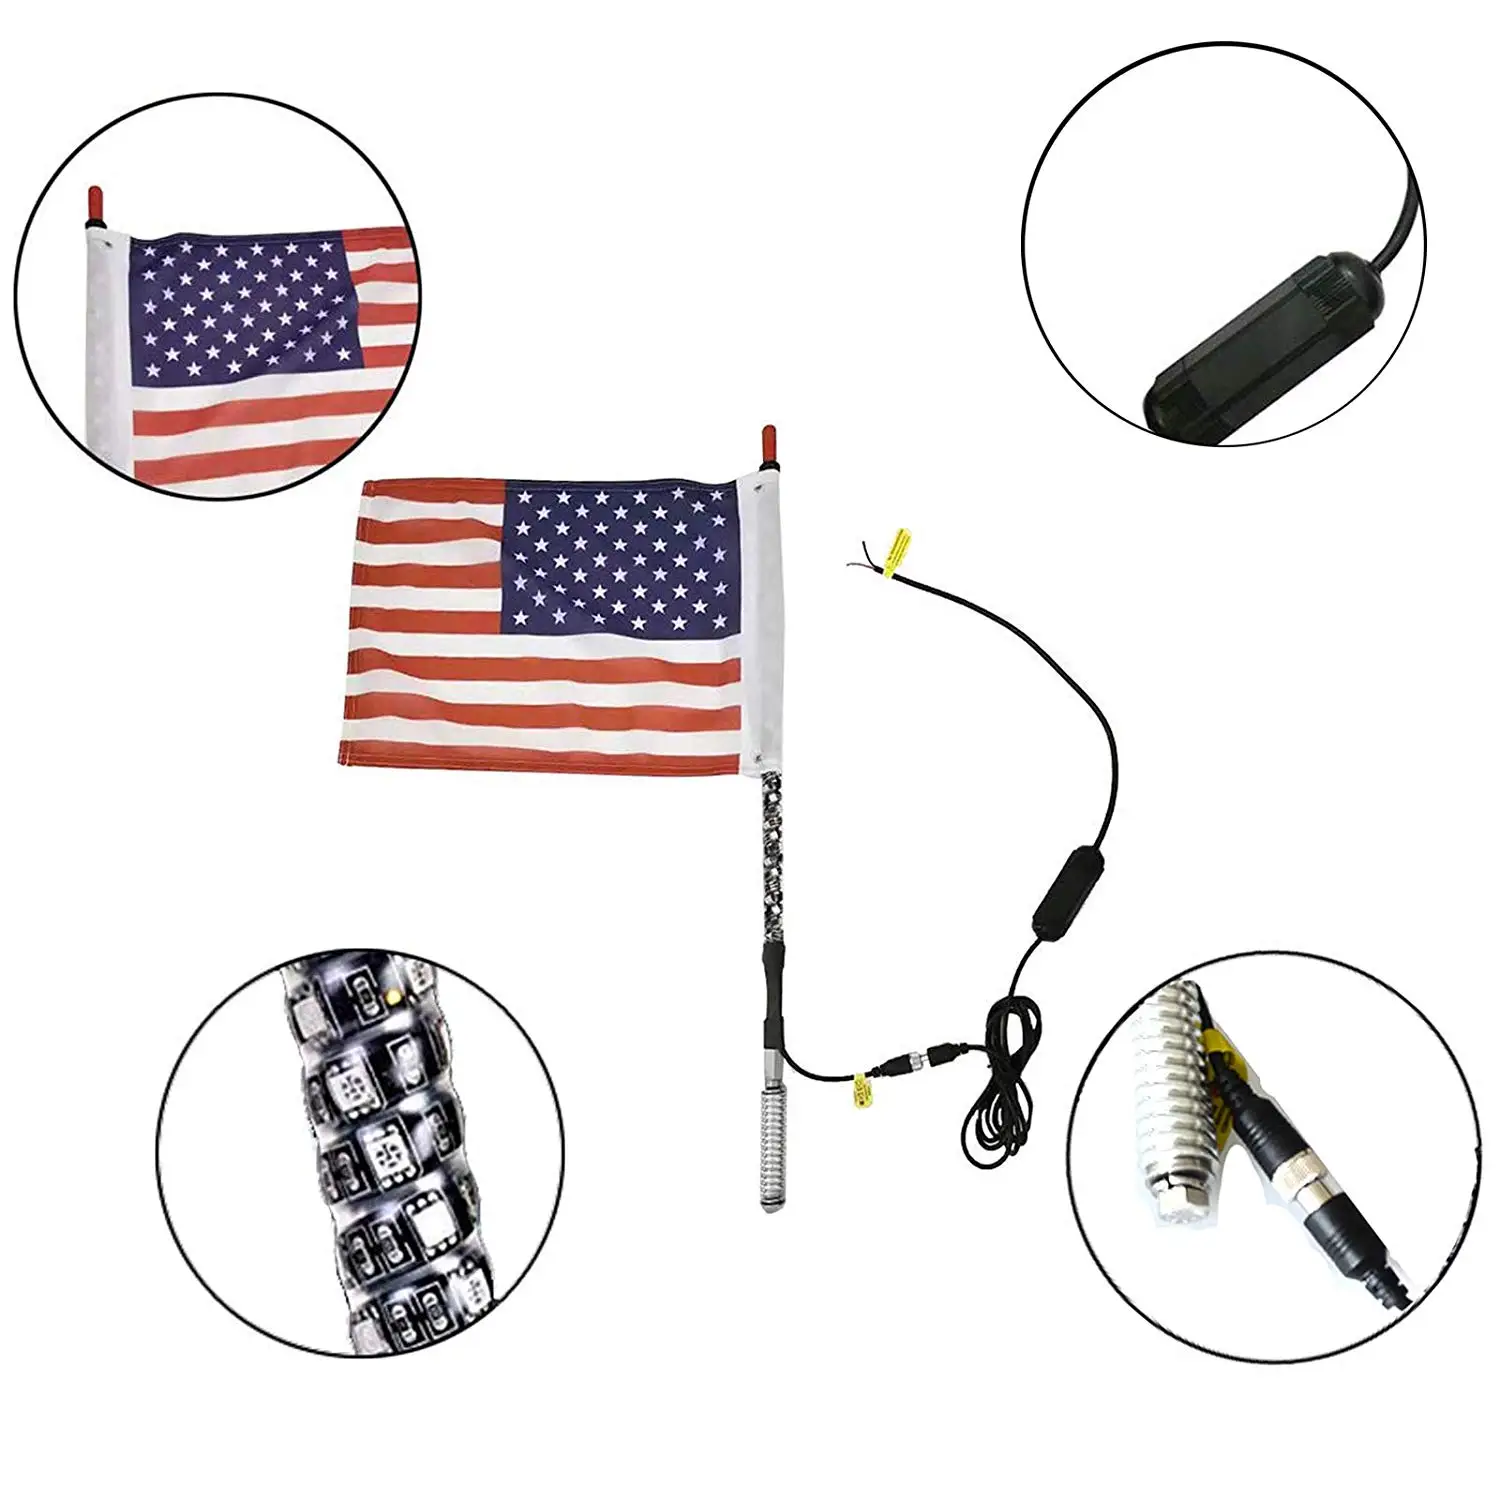 Remote Control Antenna Whips Lamp Accessories RGB 360 Degree Spiral LED Whip Lights for UTV Offroad Vehicle